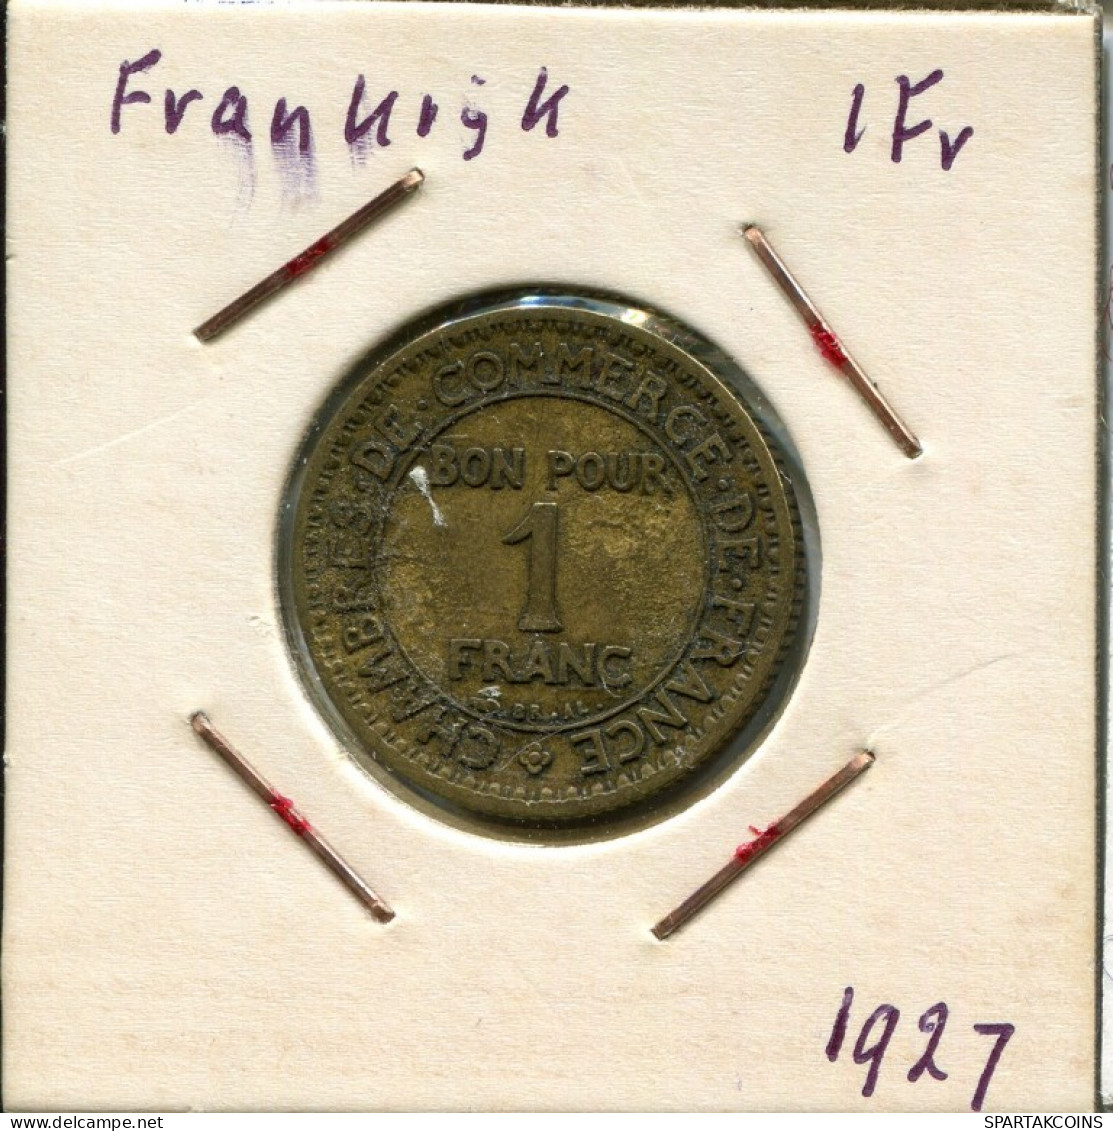 1 FRANC 1927 FRANCE Coin Chambers Of Commerce French Coin #AM530.U.A - 1 Franc